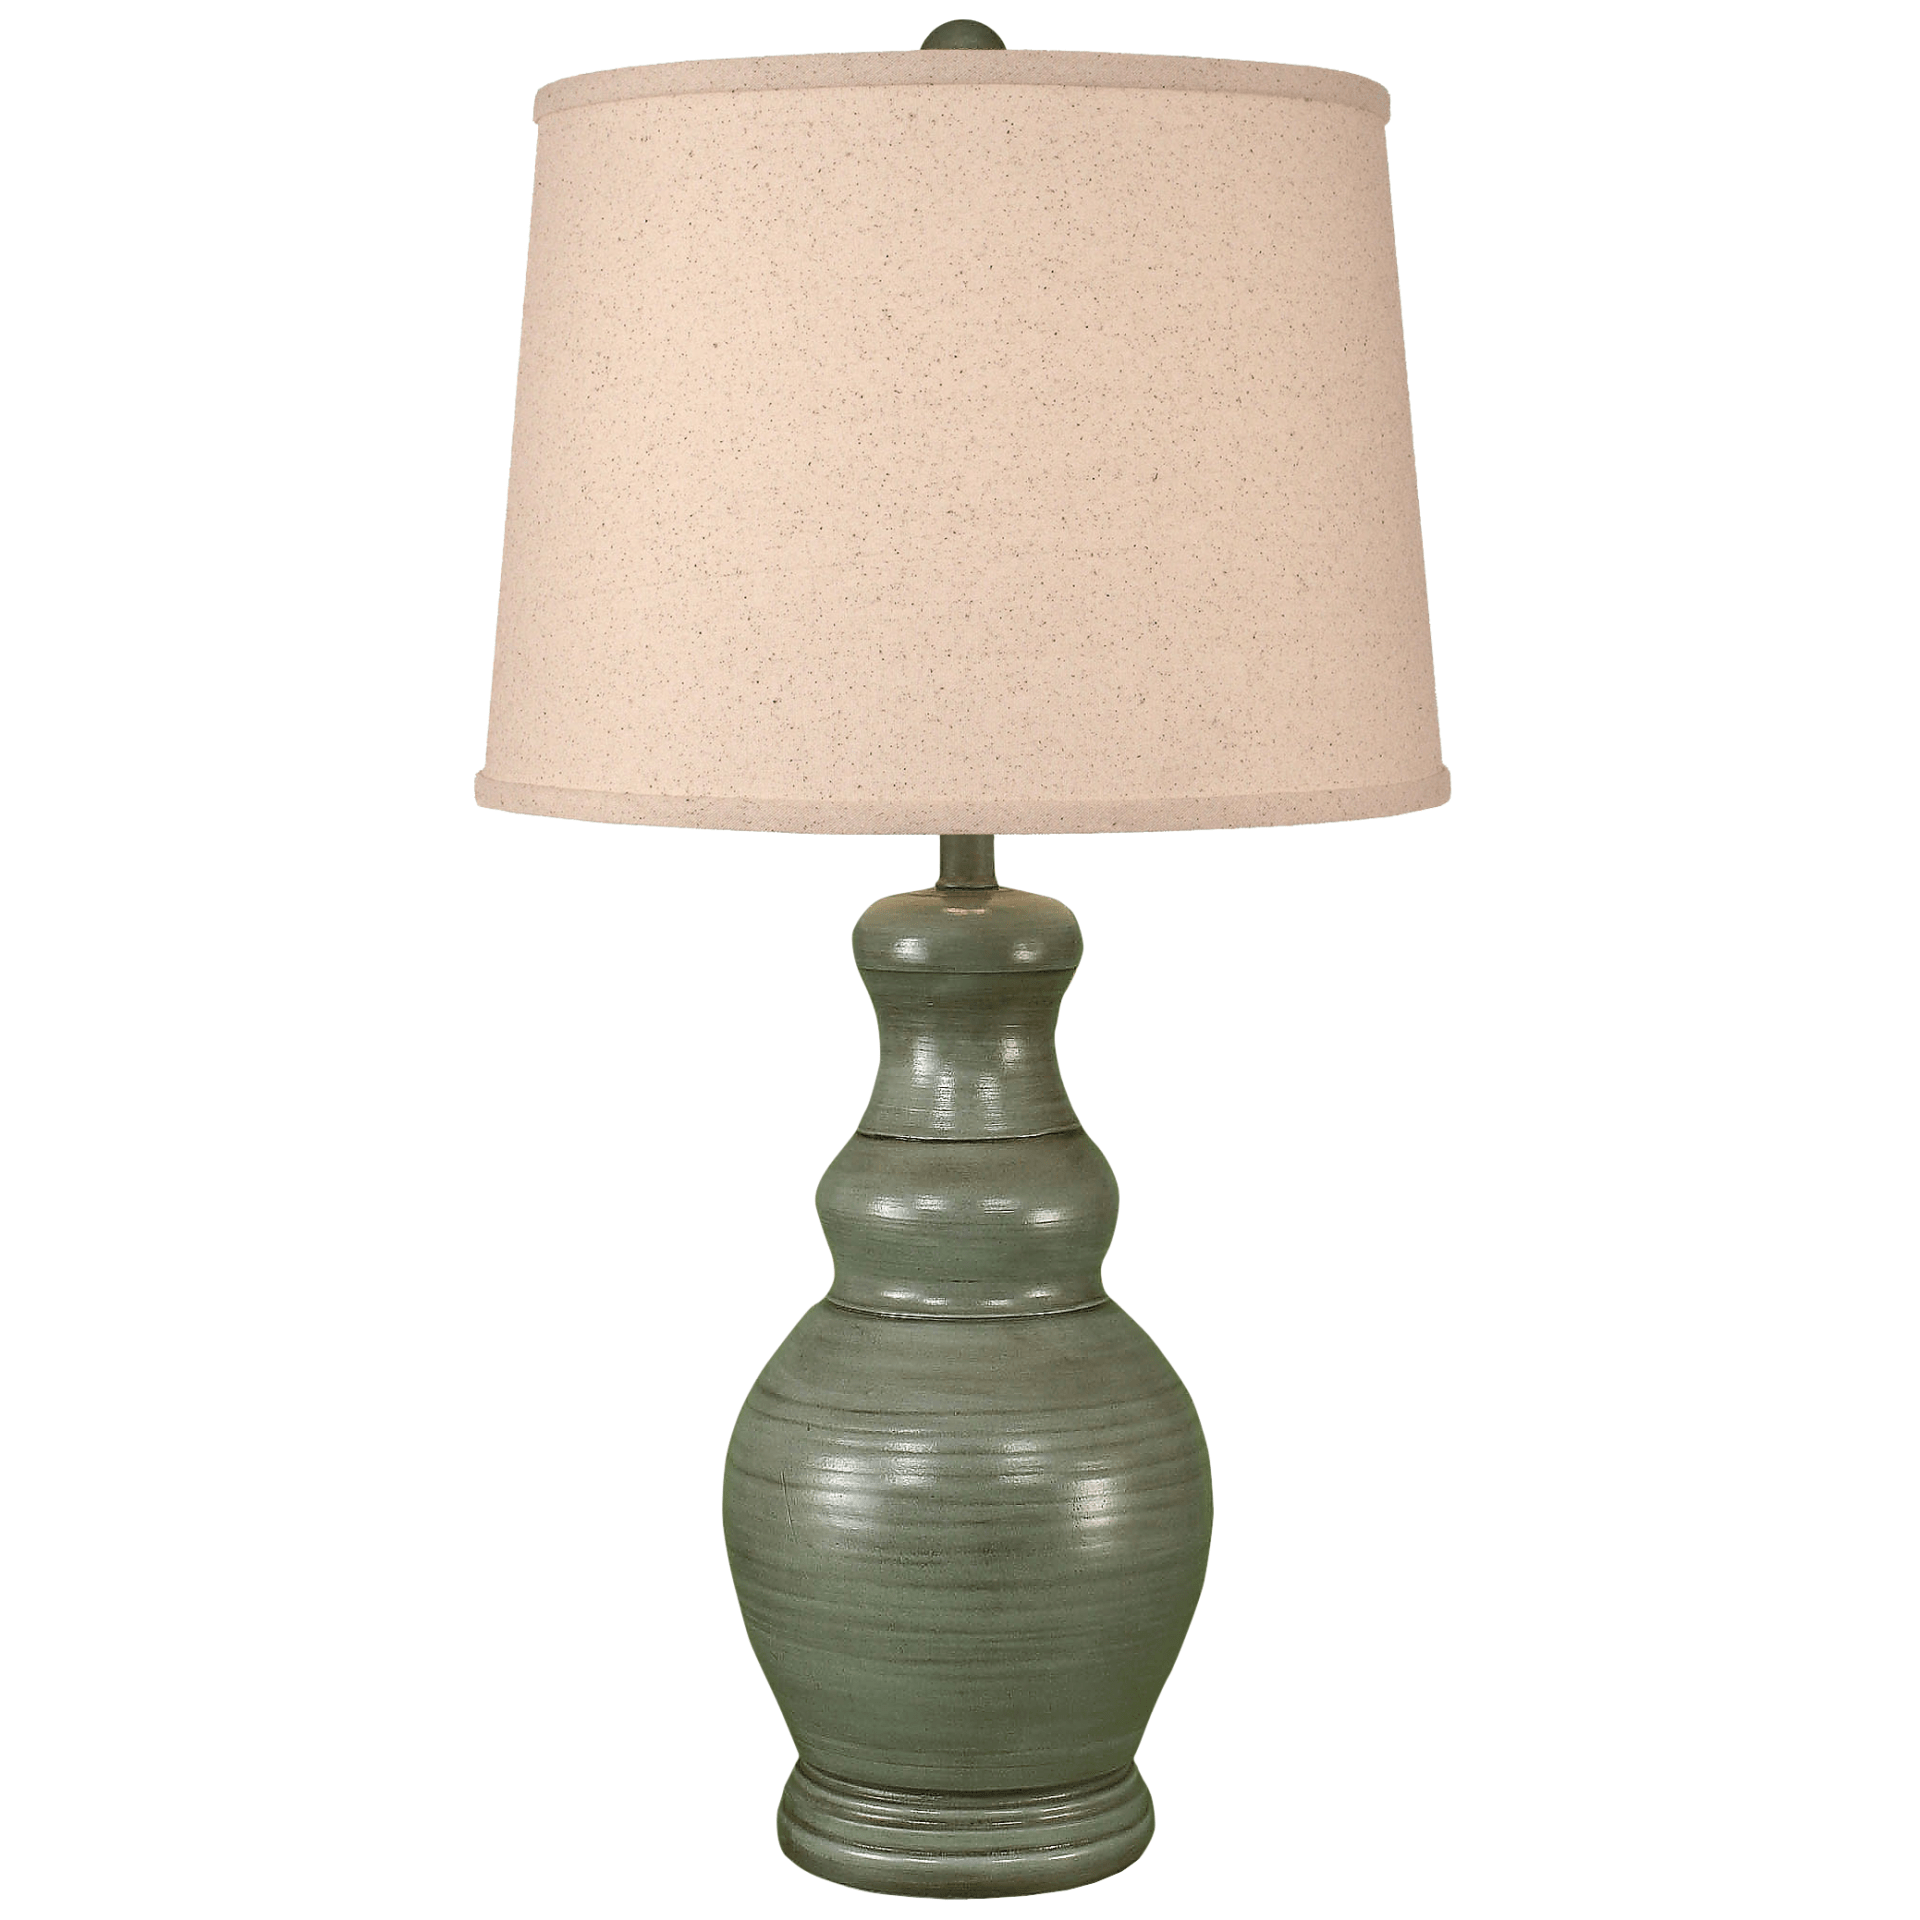 Classic Casual Table Lamp